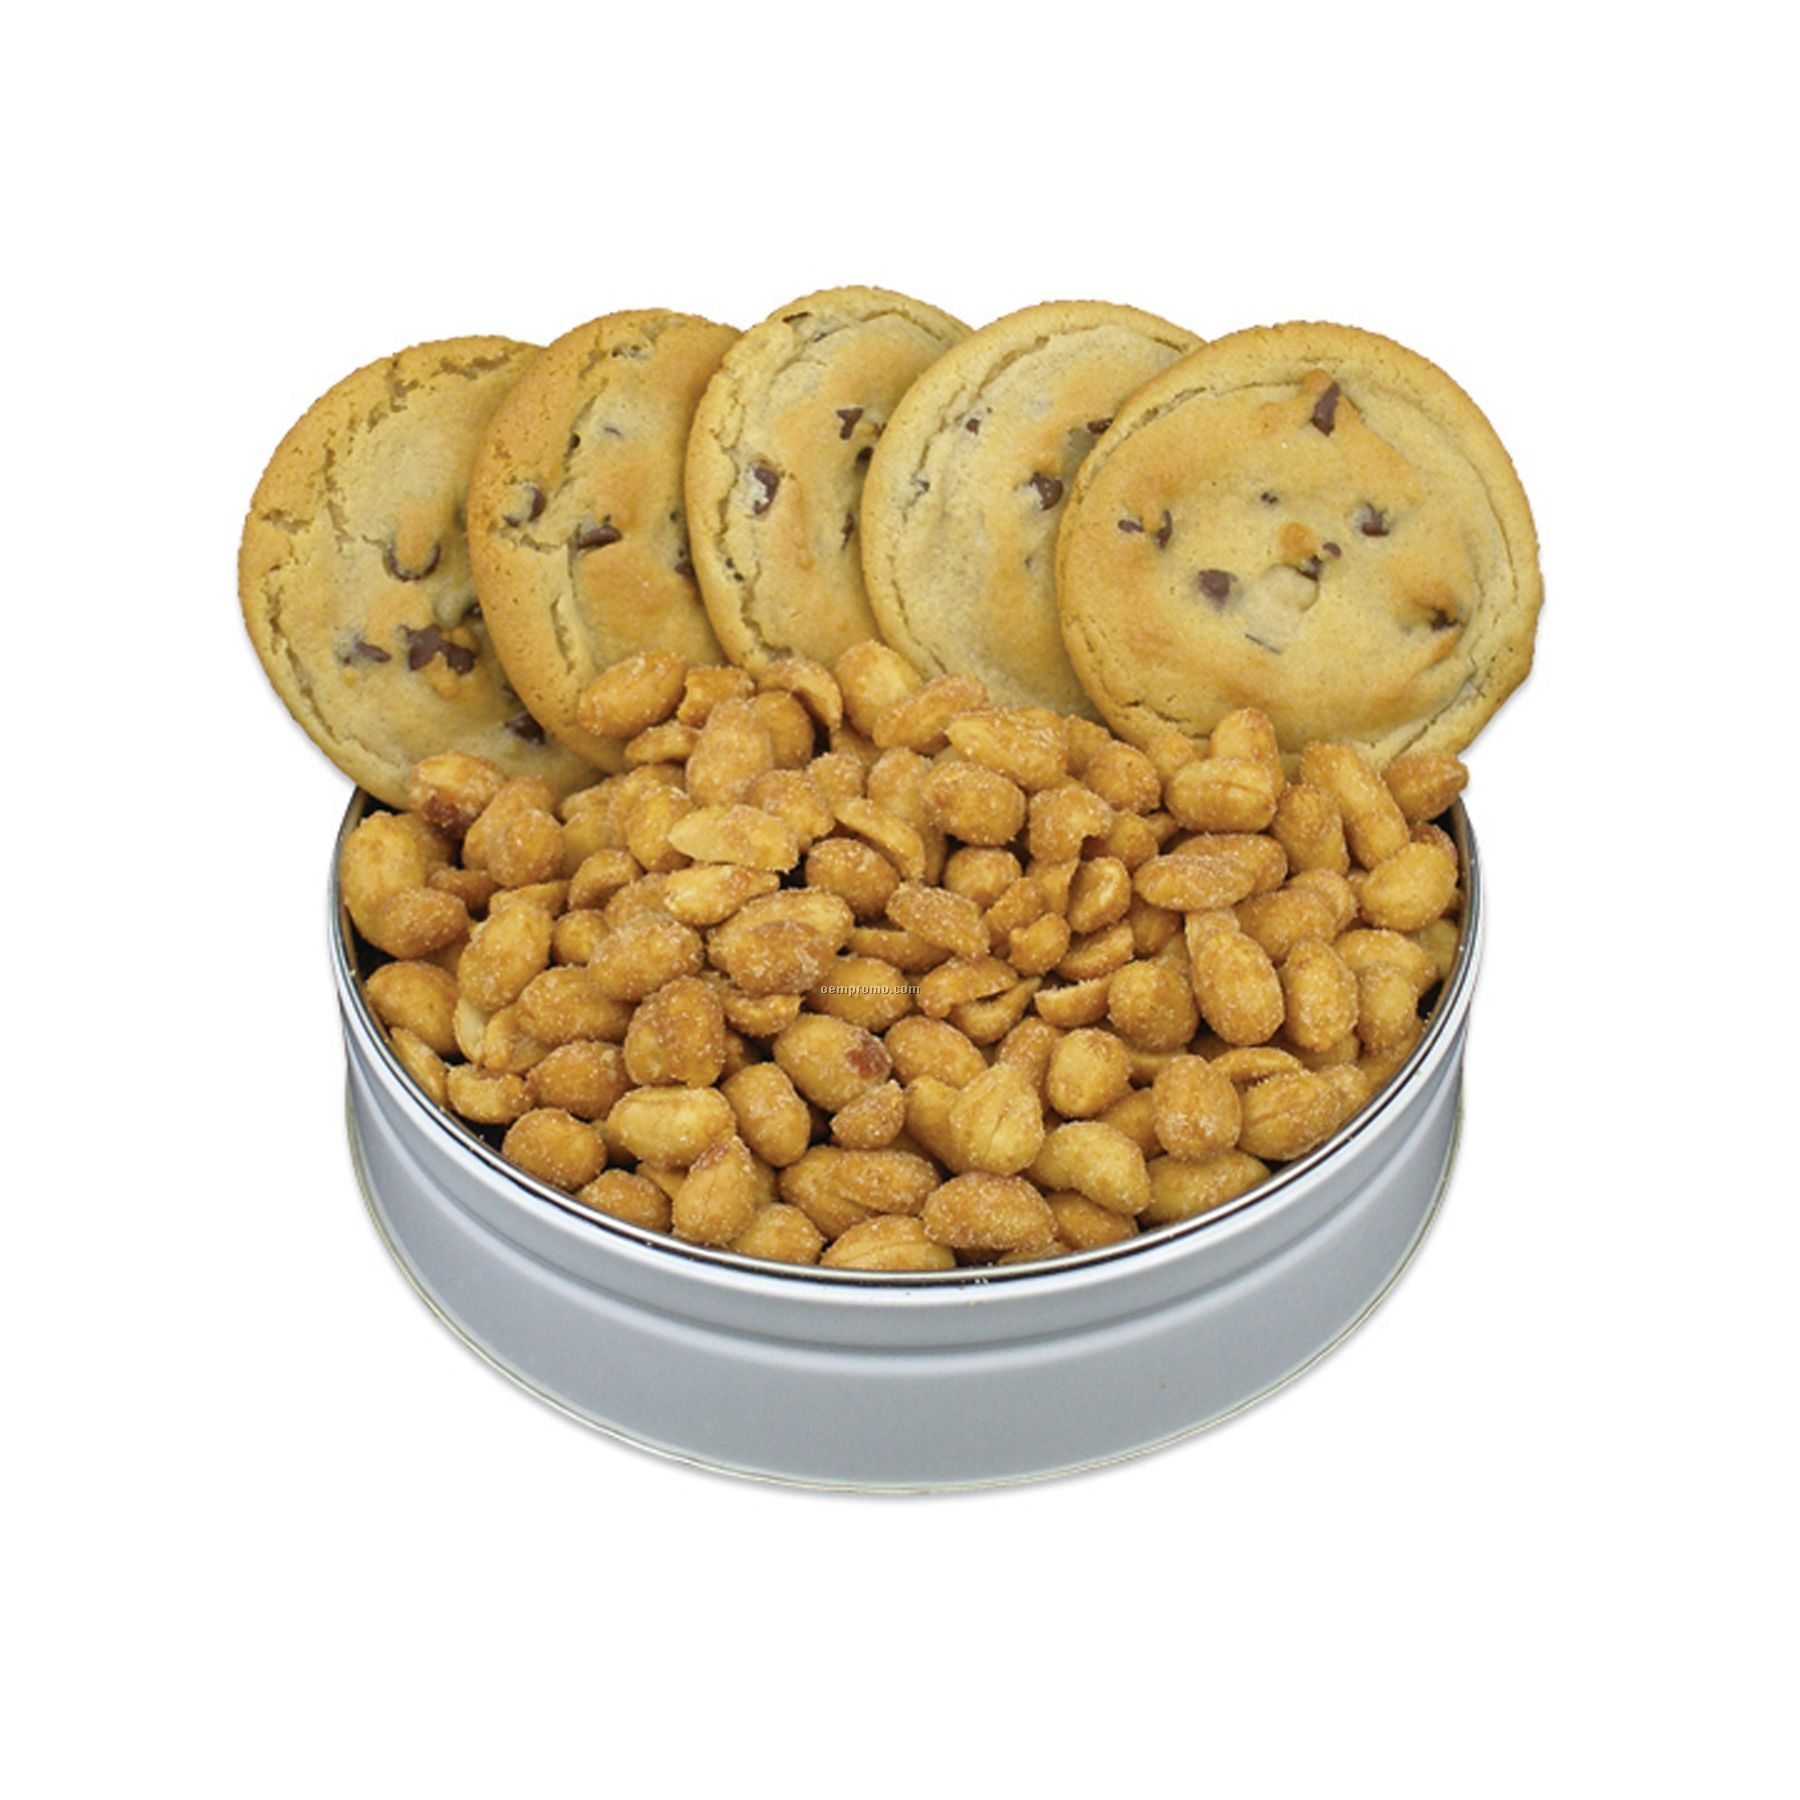 Cookie Nut Combos - 5 Chocolate Chip Cookies & Honey Roasted Peanuts (5 Oz)